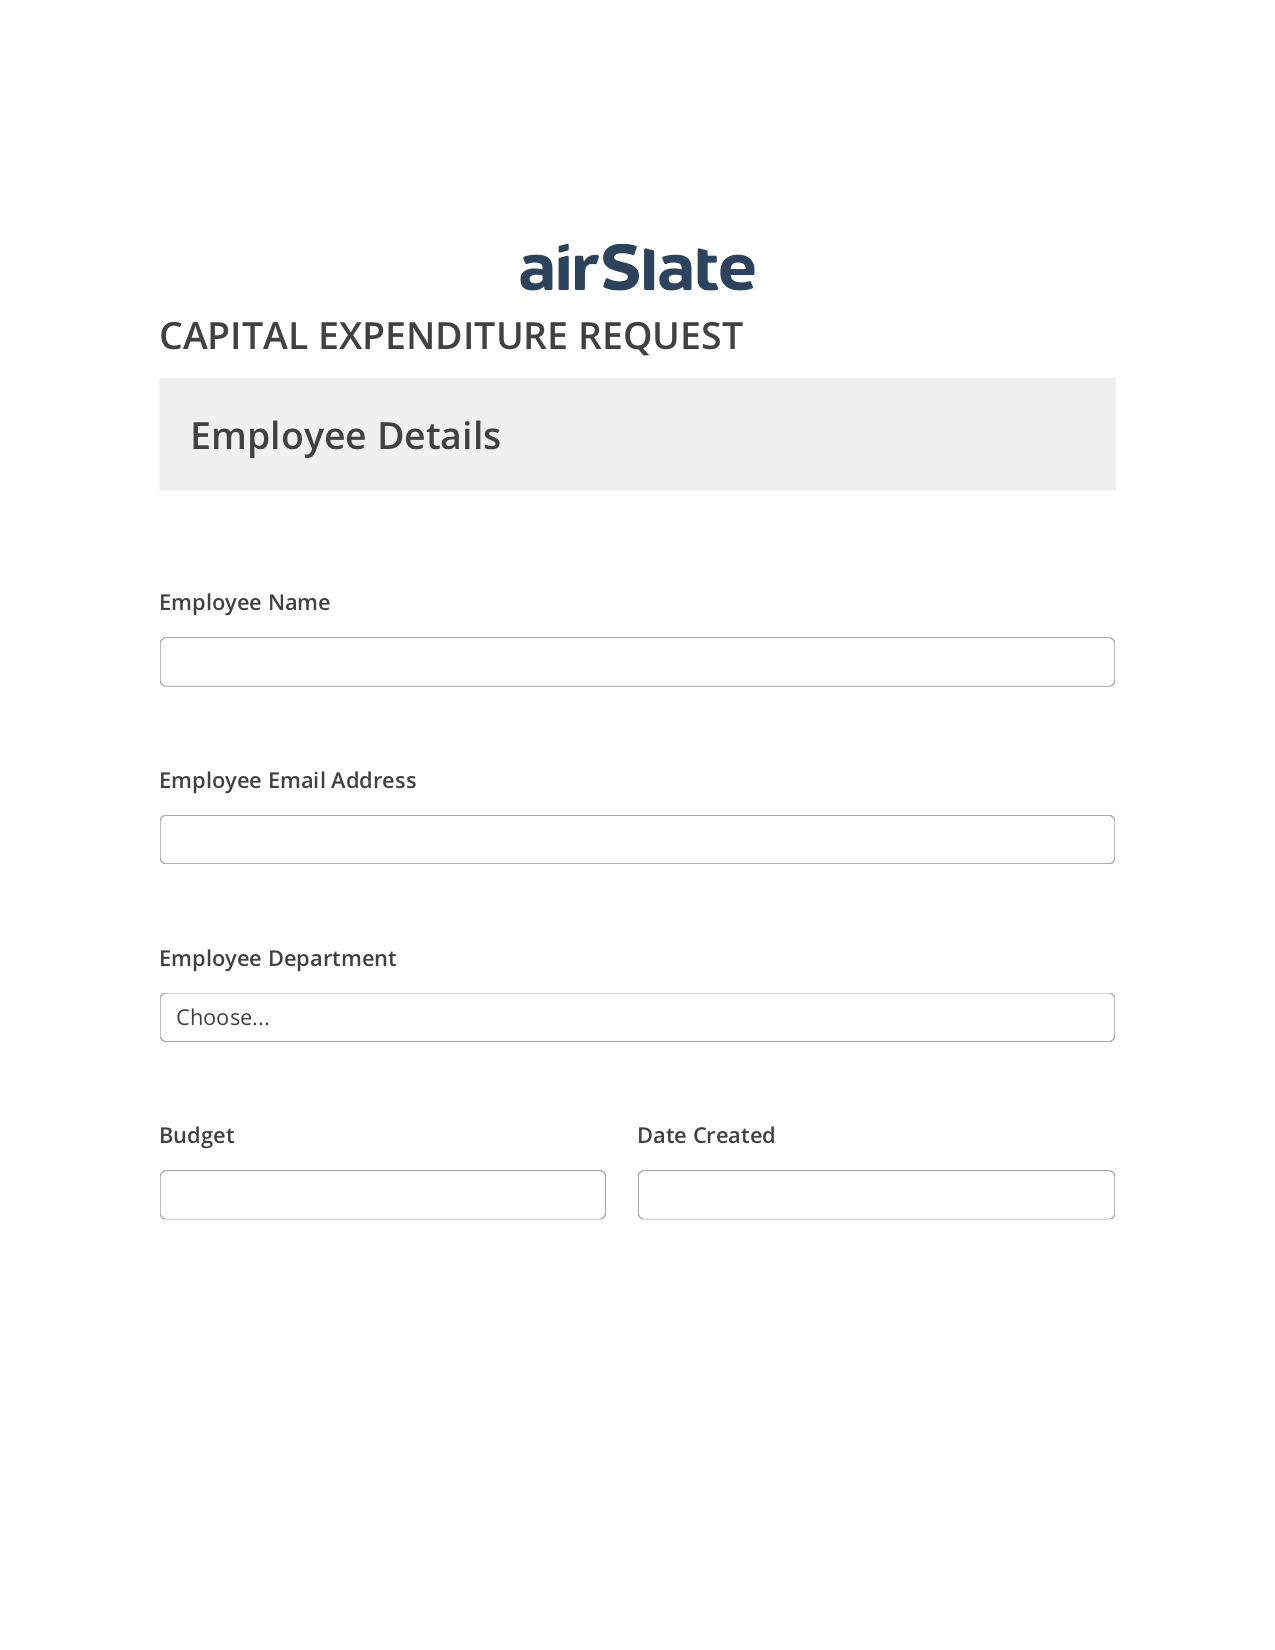 Capital Expenditure Request Approval Workflow Pre-fill from MySQL Dropdown Options Bot, Send a Slate to Salesforce Contact Bot, Archive to SharePoint Folder Bot